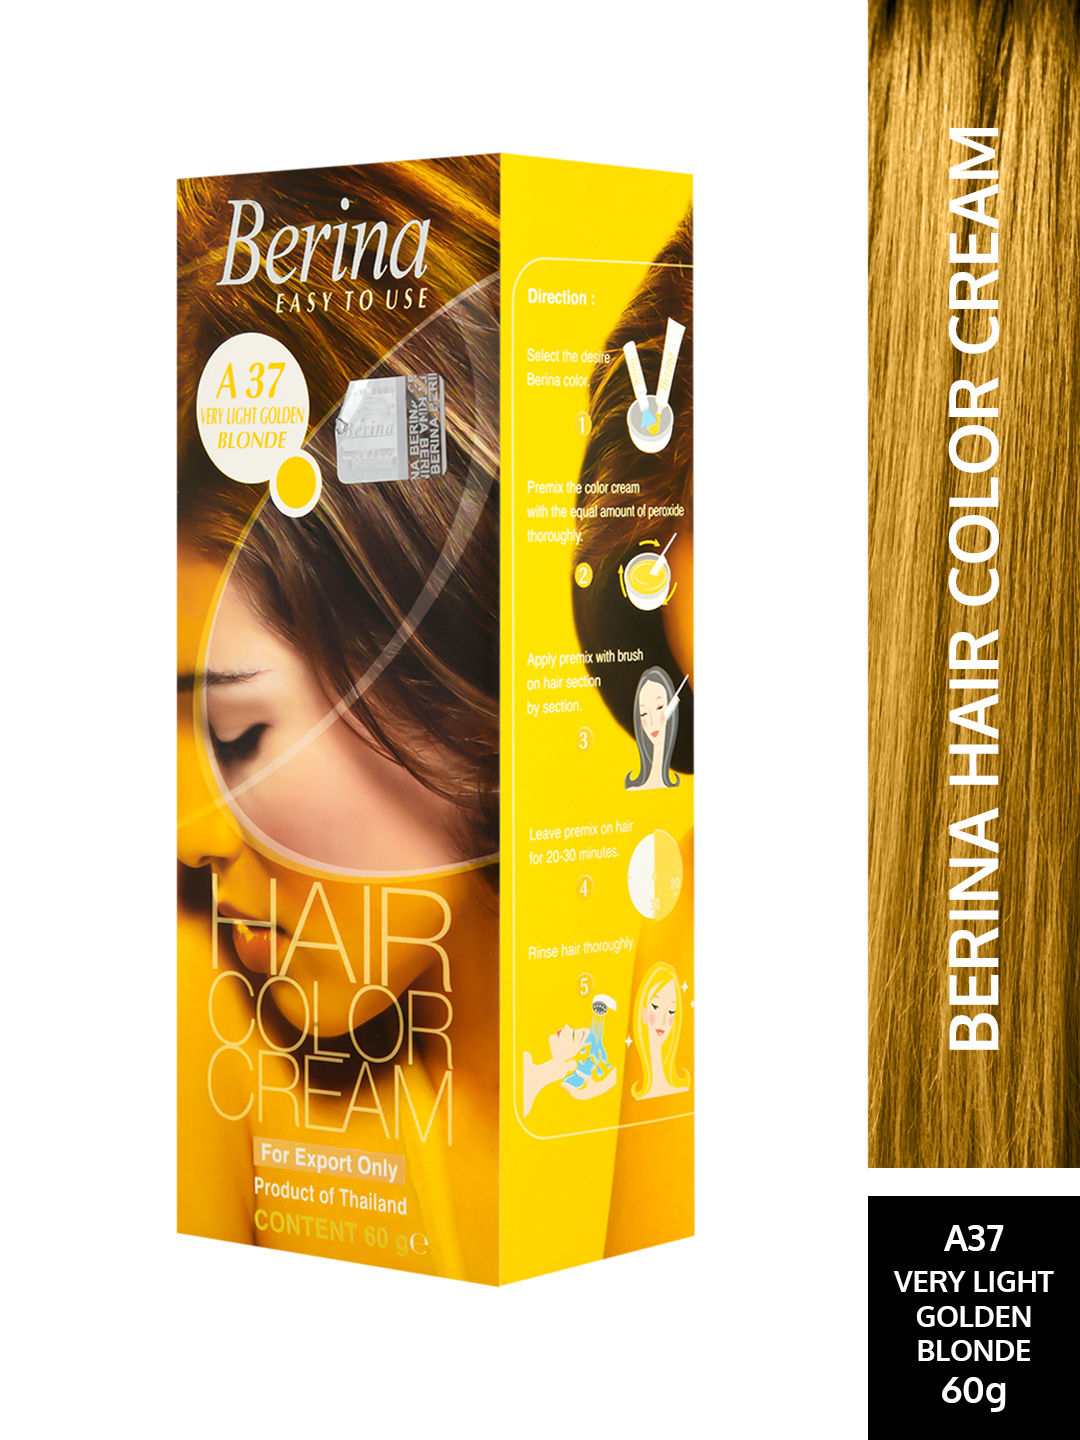 Berina Hair Color Cream - Very Golden Blonde: Buy Berina Hair Color Cream - Very Light Golden Online at Best Price in India | Nykaa